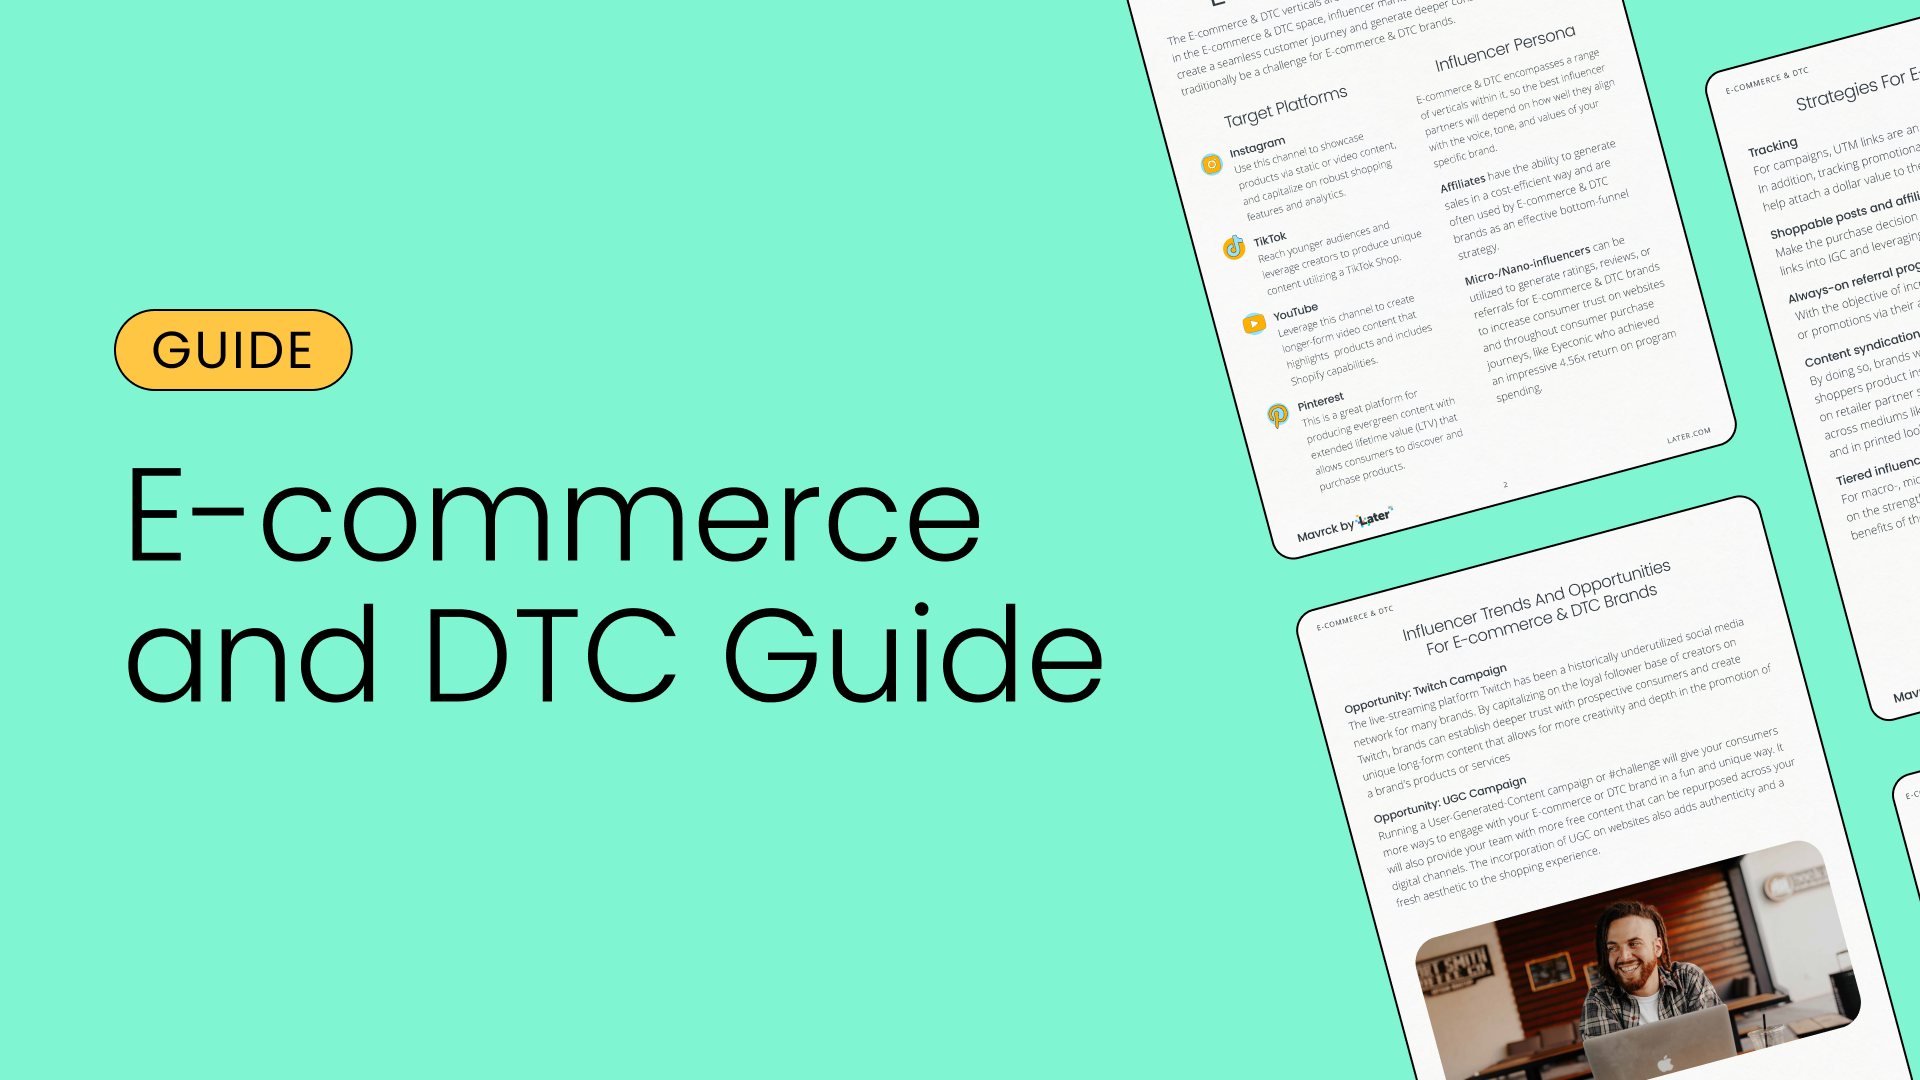 Free influencer marketing guide for E-commerce and DTC brands from Later